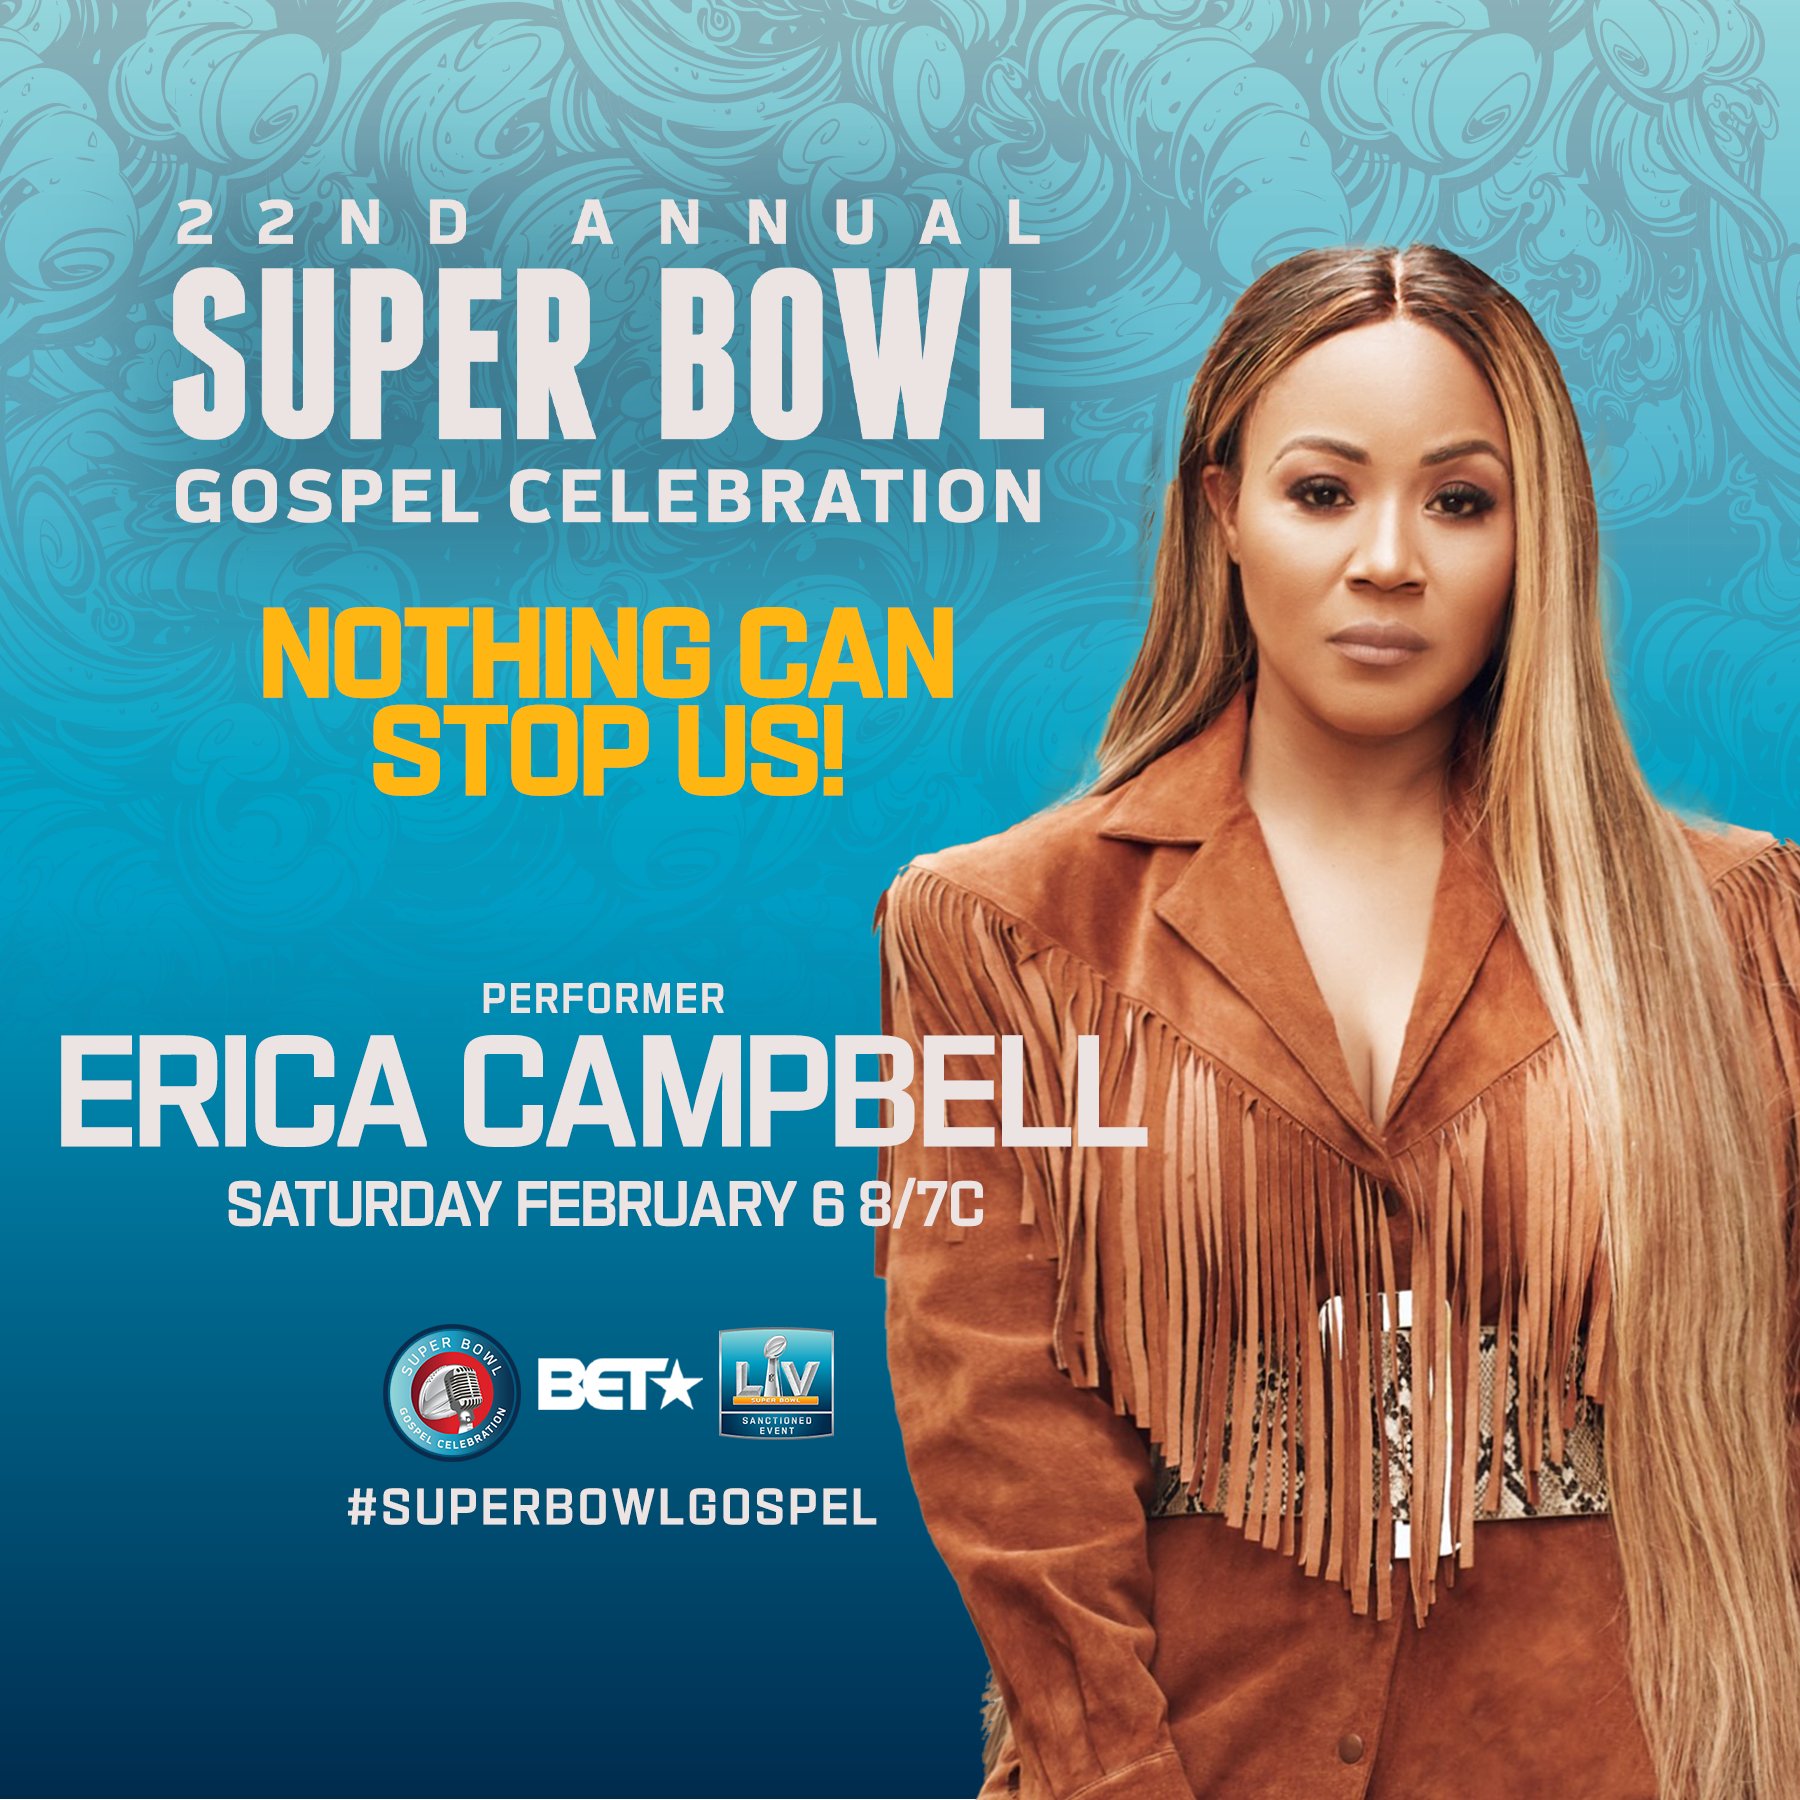 Erica Campbell on Twitter: 'I'm so excited to be a part of the 22nd Annual  NFL Sanctioned #SuperBowlGospel Celebration. Tune in to BET this Saturday,  February 6 at 8 pm EST! #EricaCampbell #